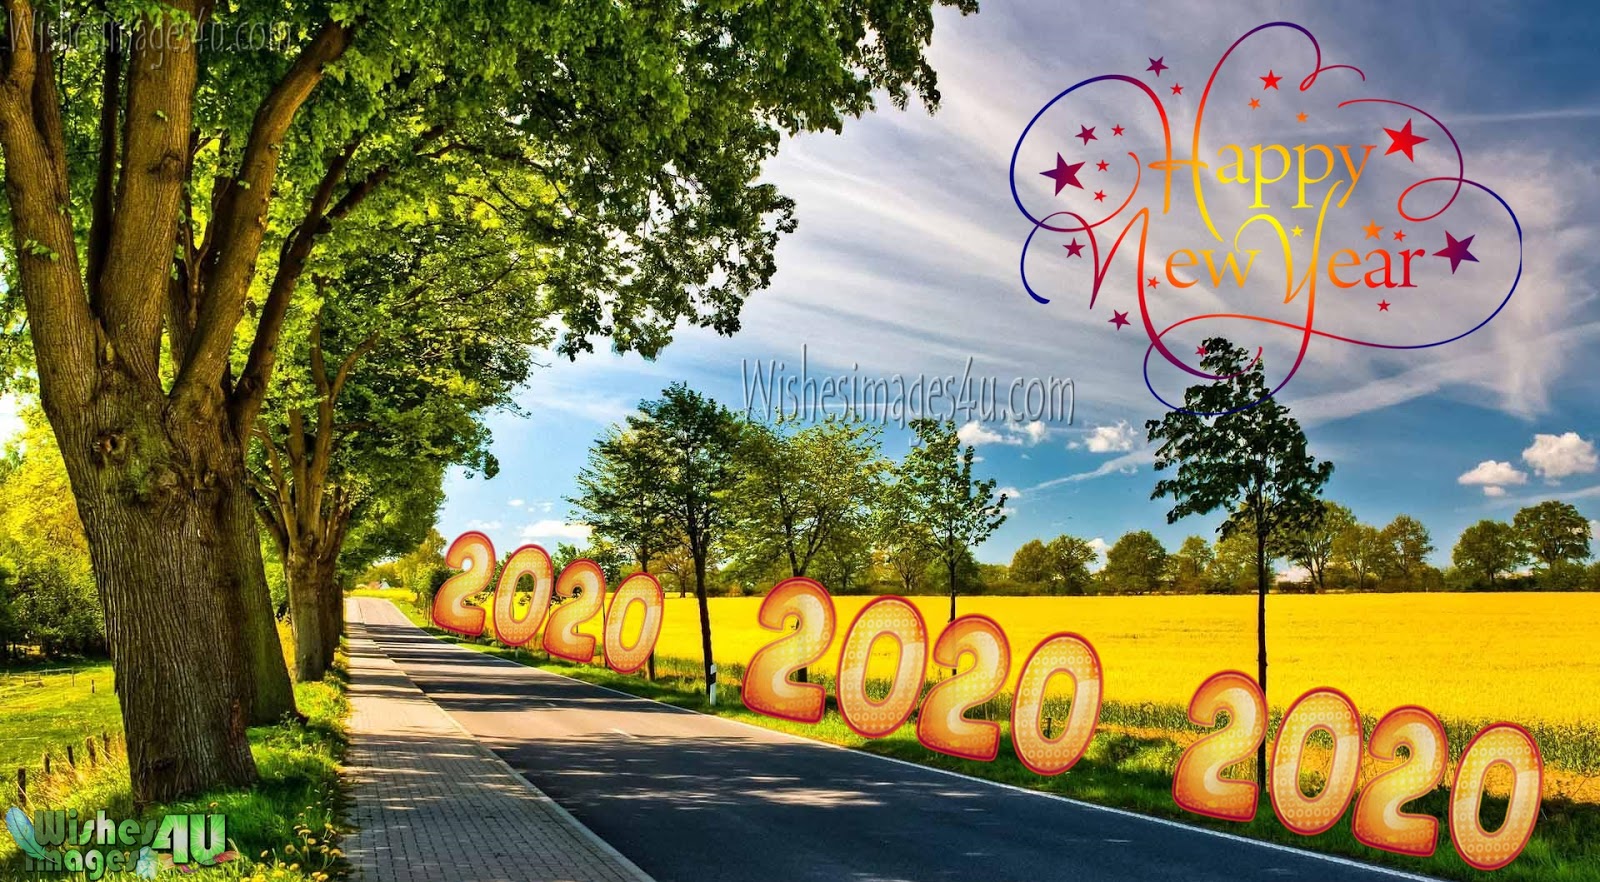 Happy New Year 2020 Nature Wallpapers Download Free - Happy New Year 2020  Image Nature - 1600x882 Wallpaper 